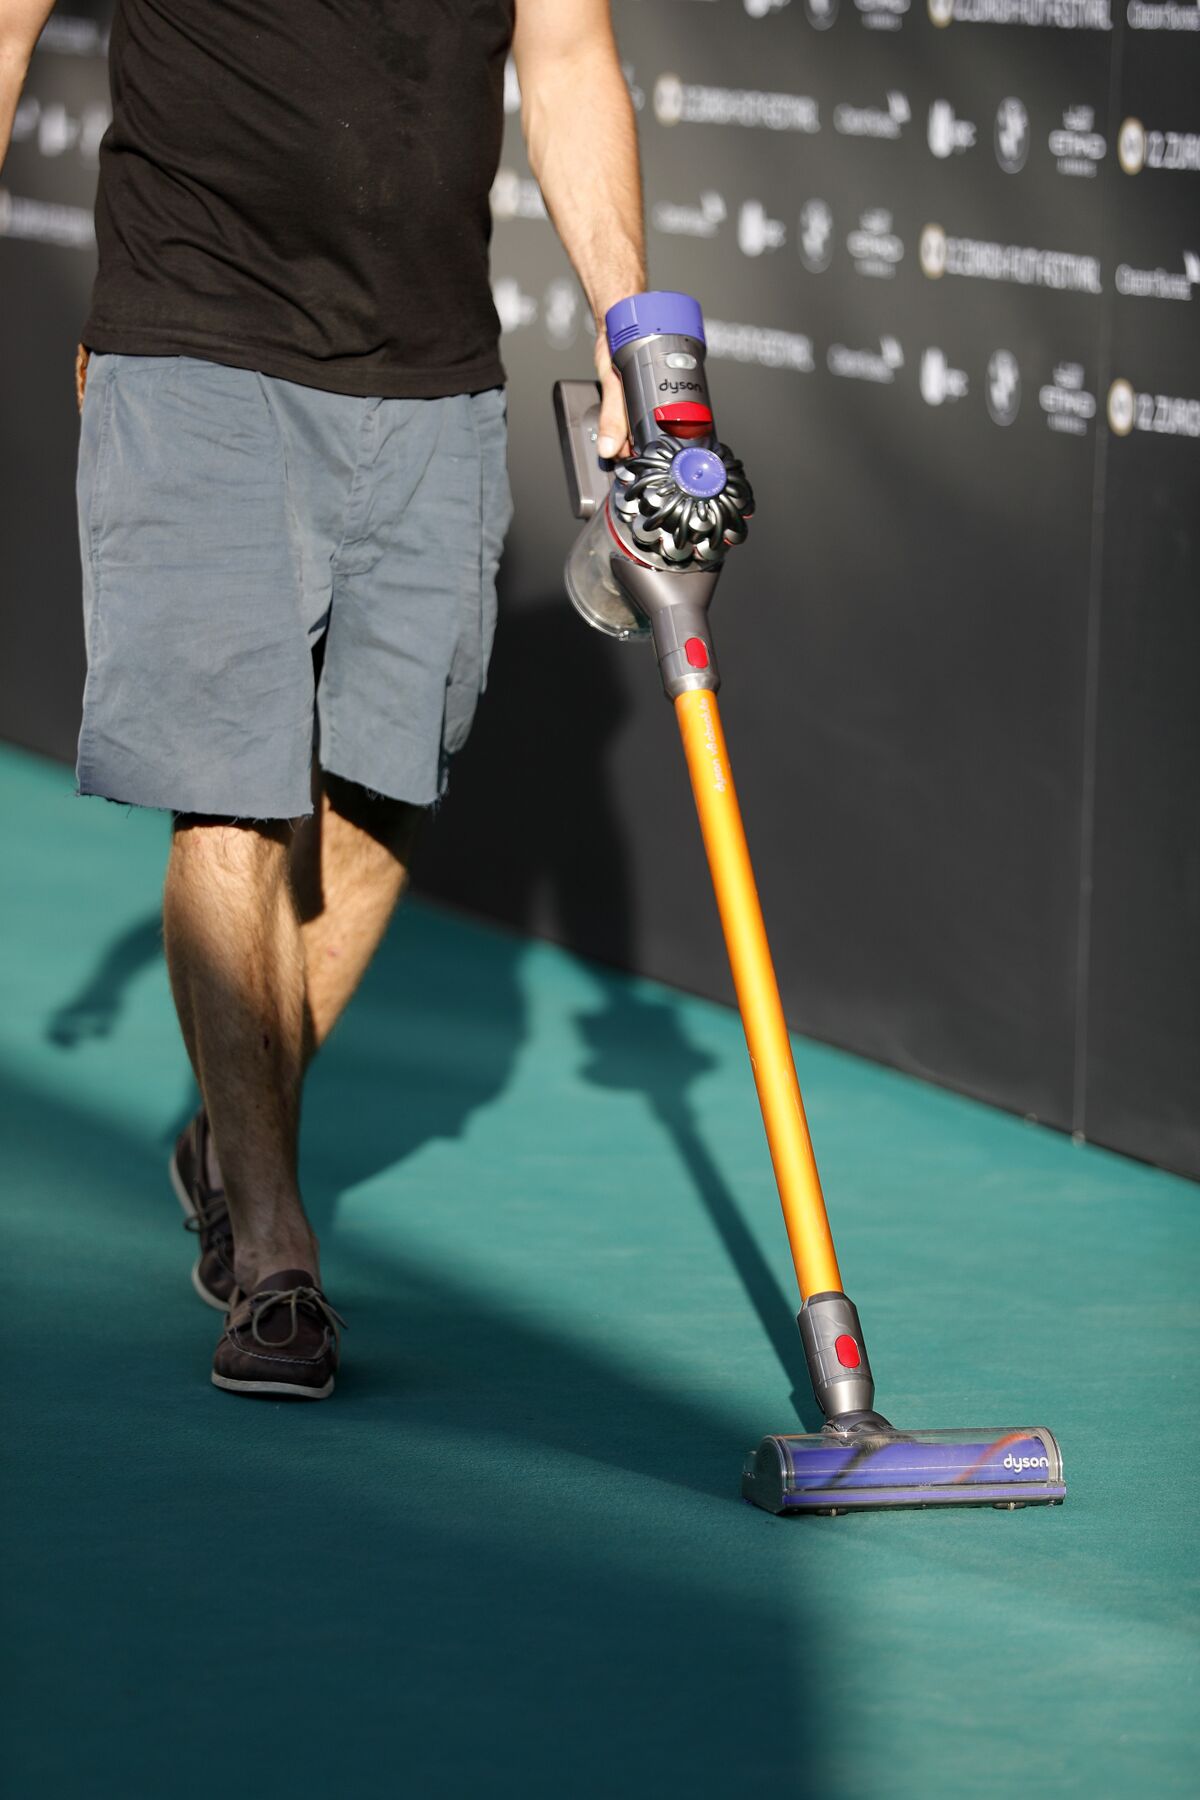 Dyson's Cordless Vacuums Drive Past $3 Bloomberg